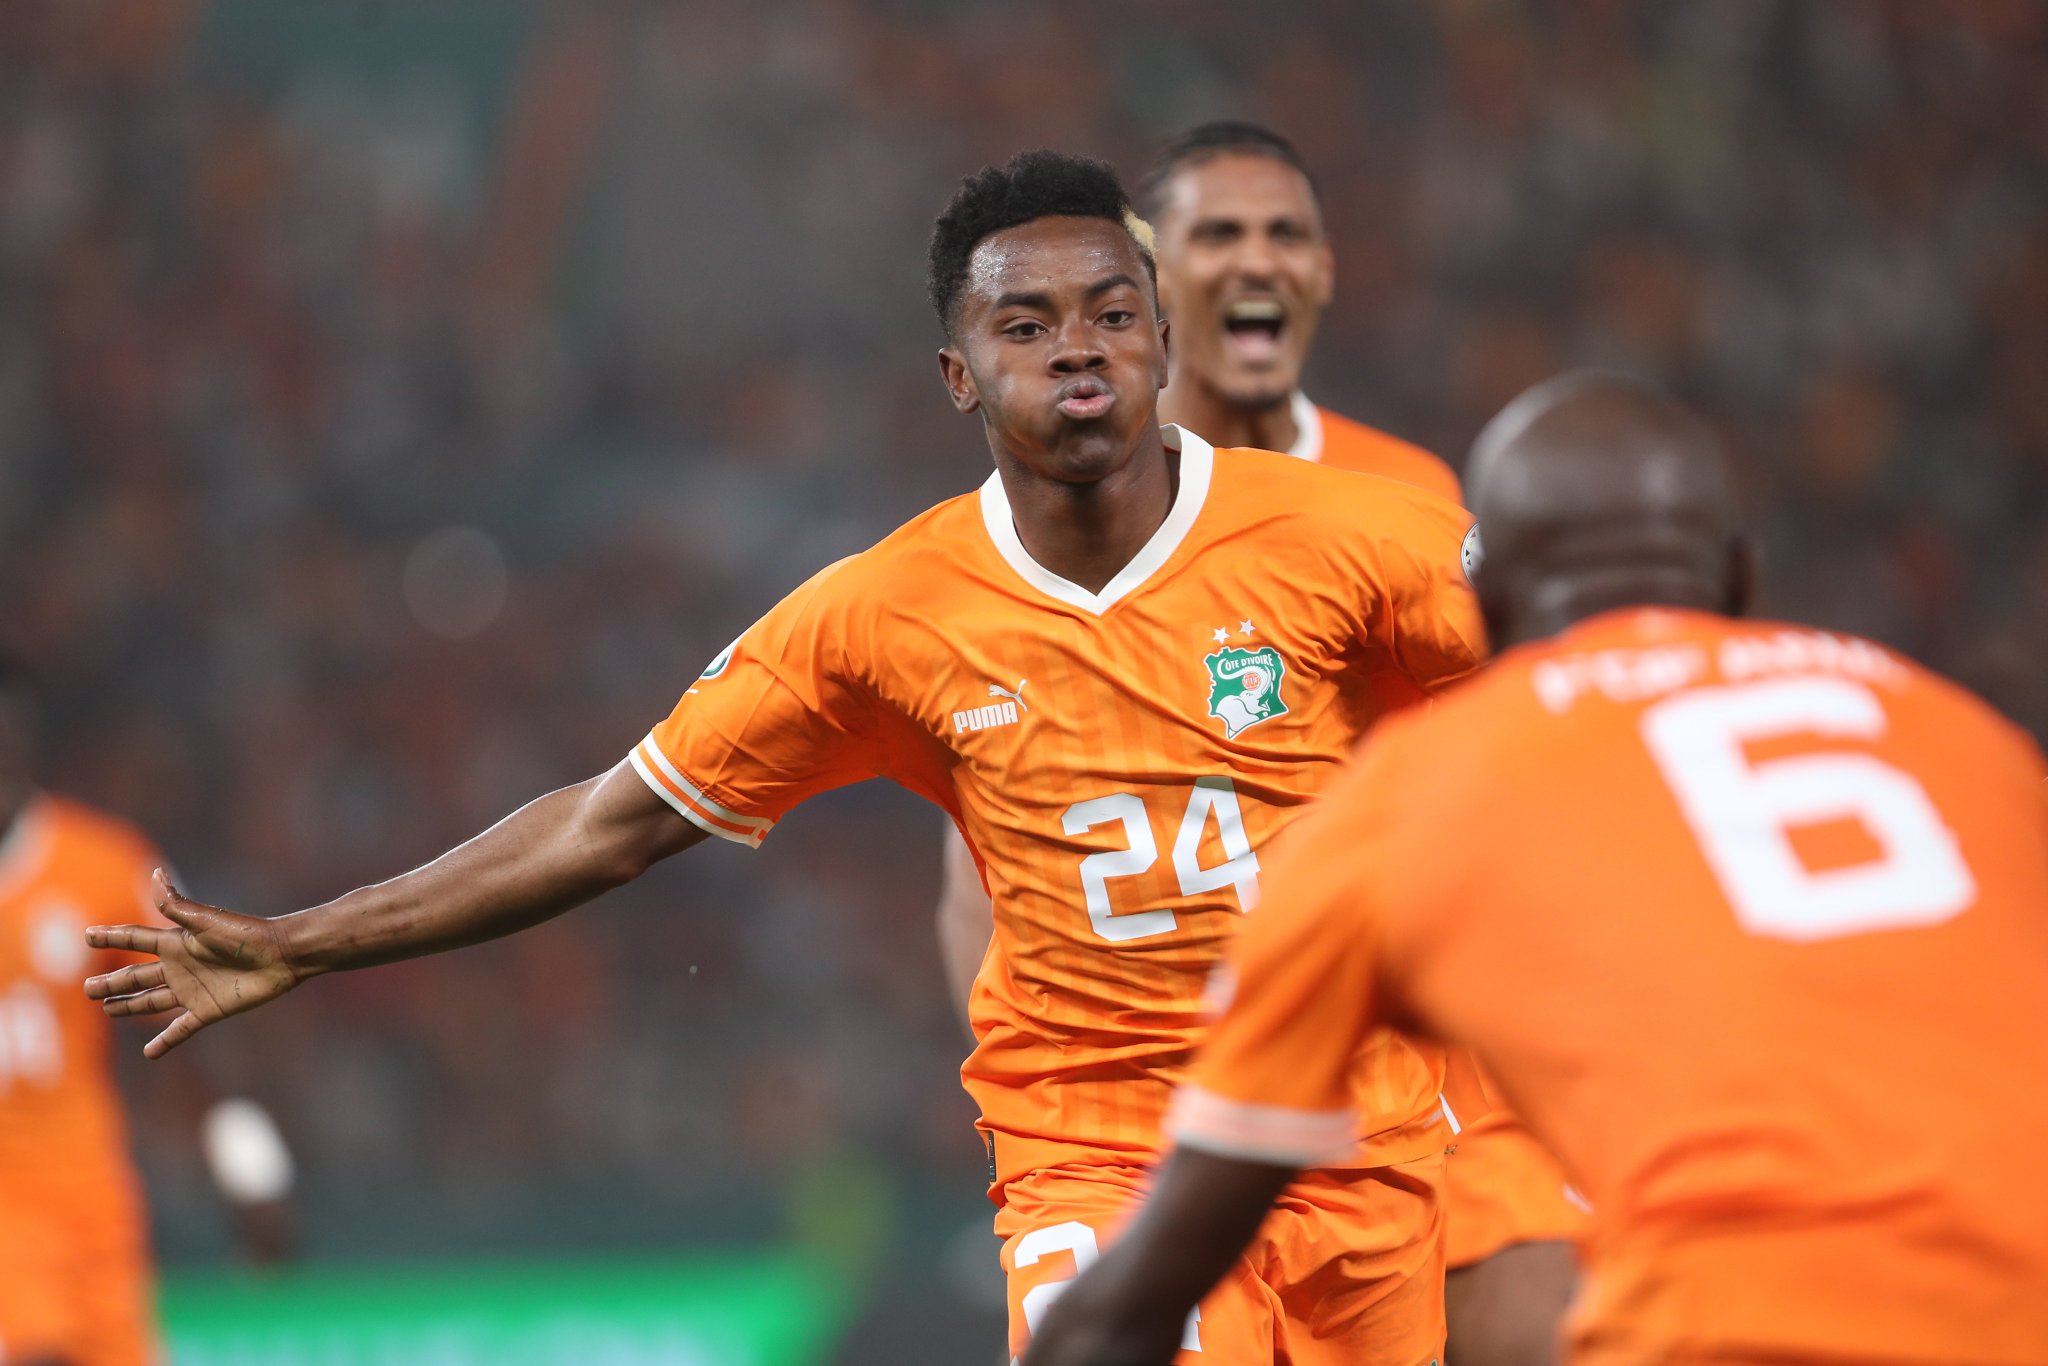 AFCON 2023: Côte d’Ivoire beat Mali to qualify for semifinals